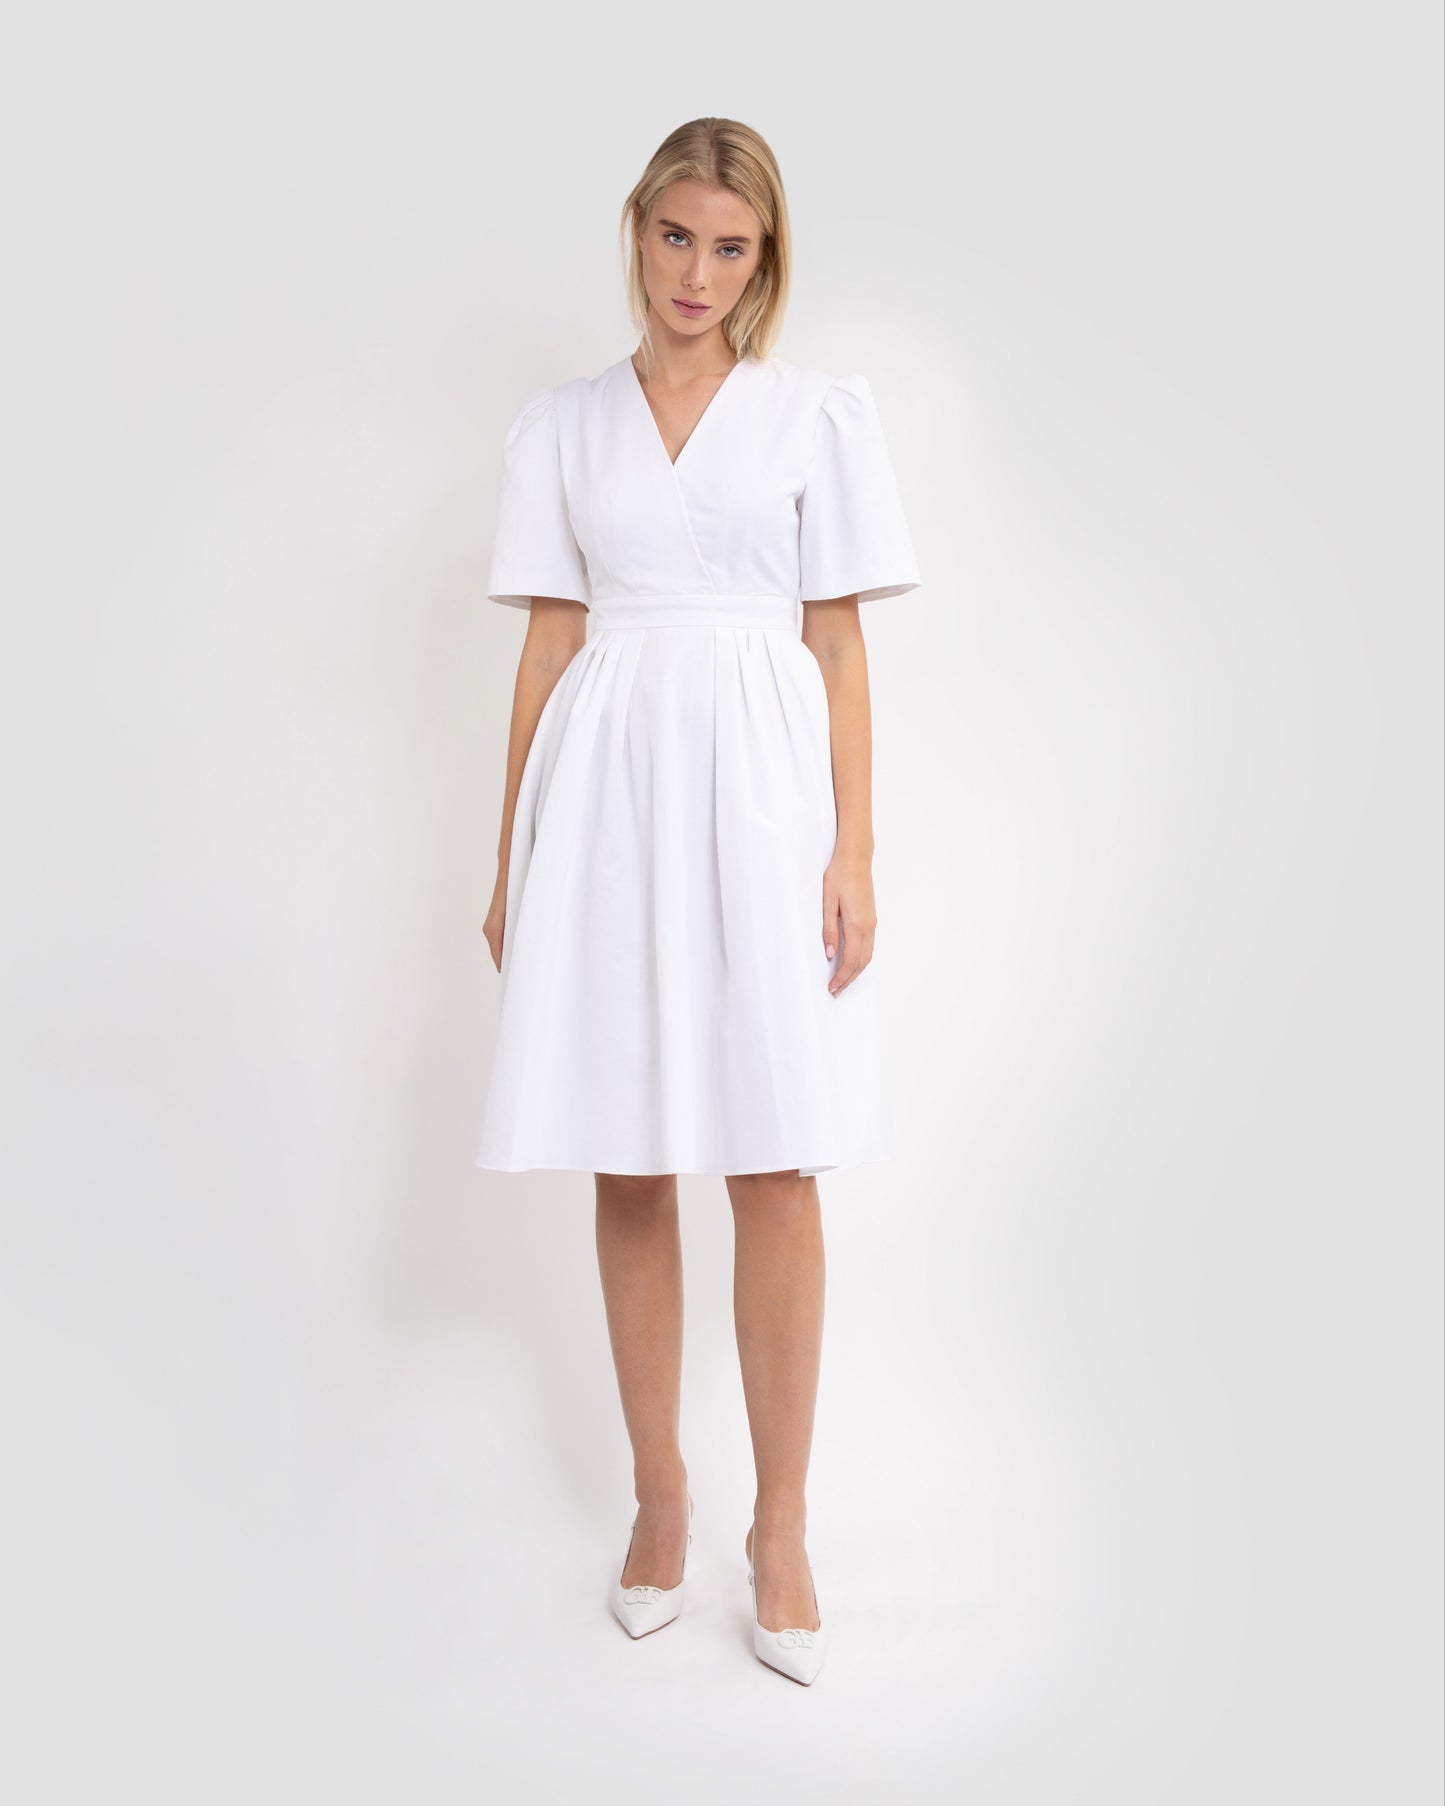 Structured Bell Sleeves Wrap Dress